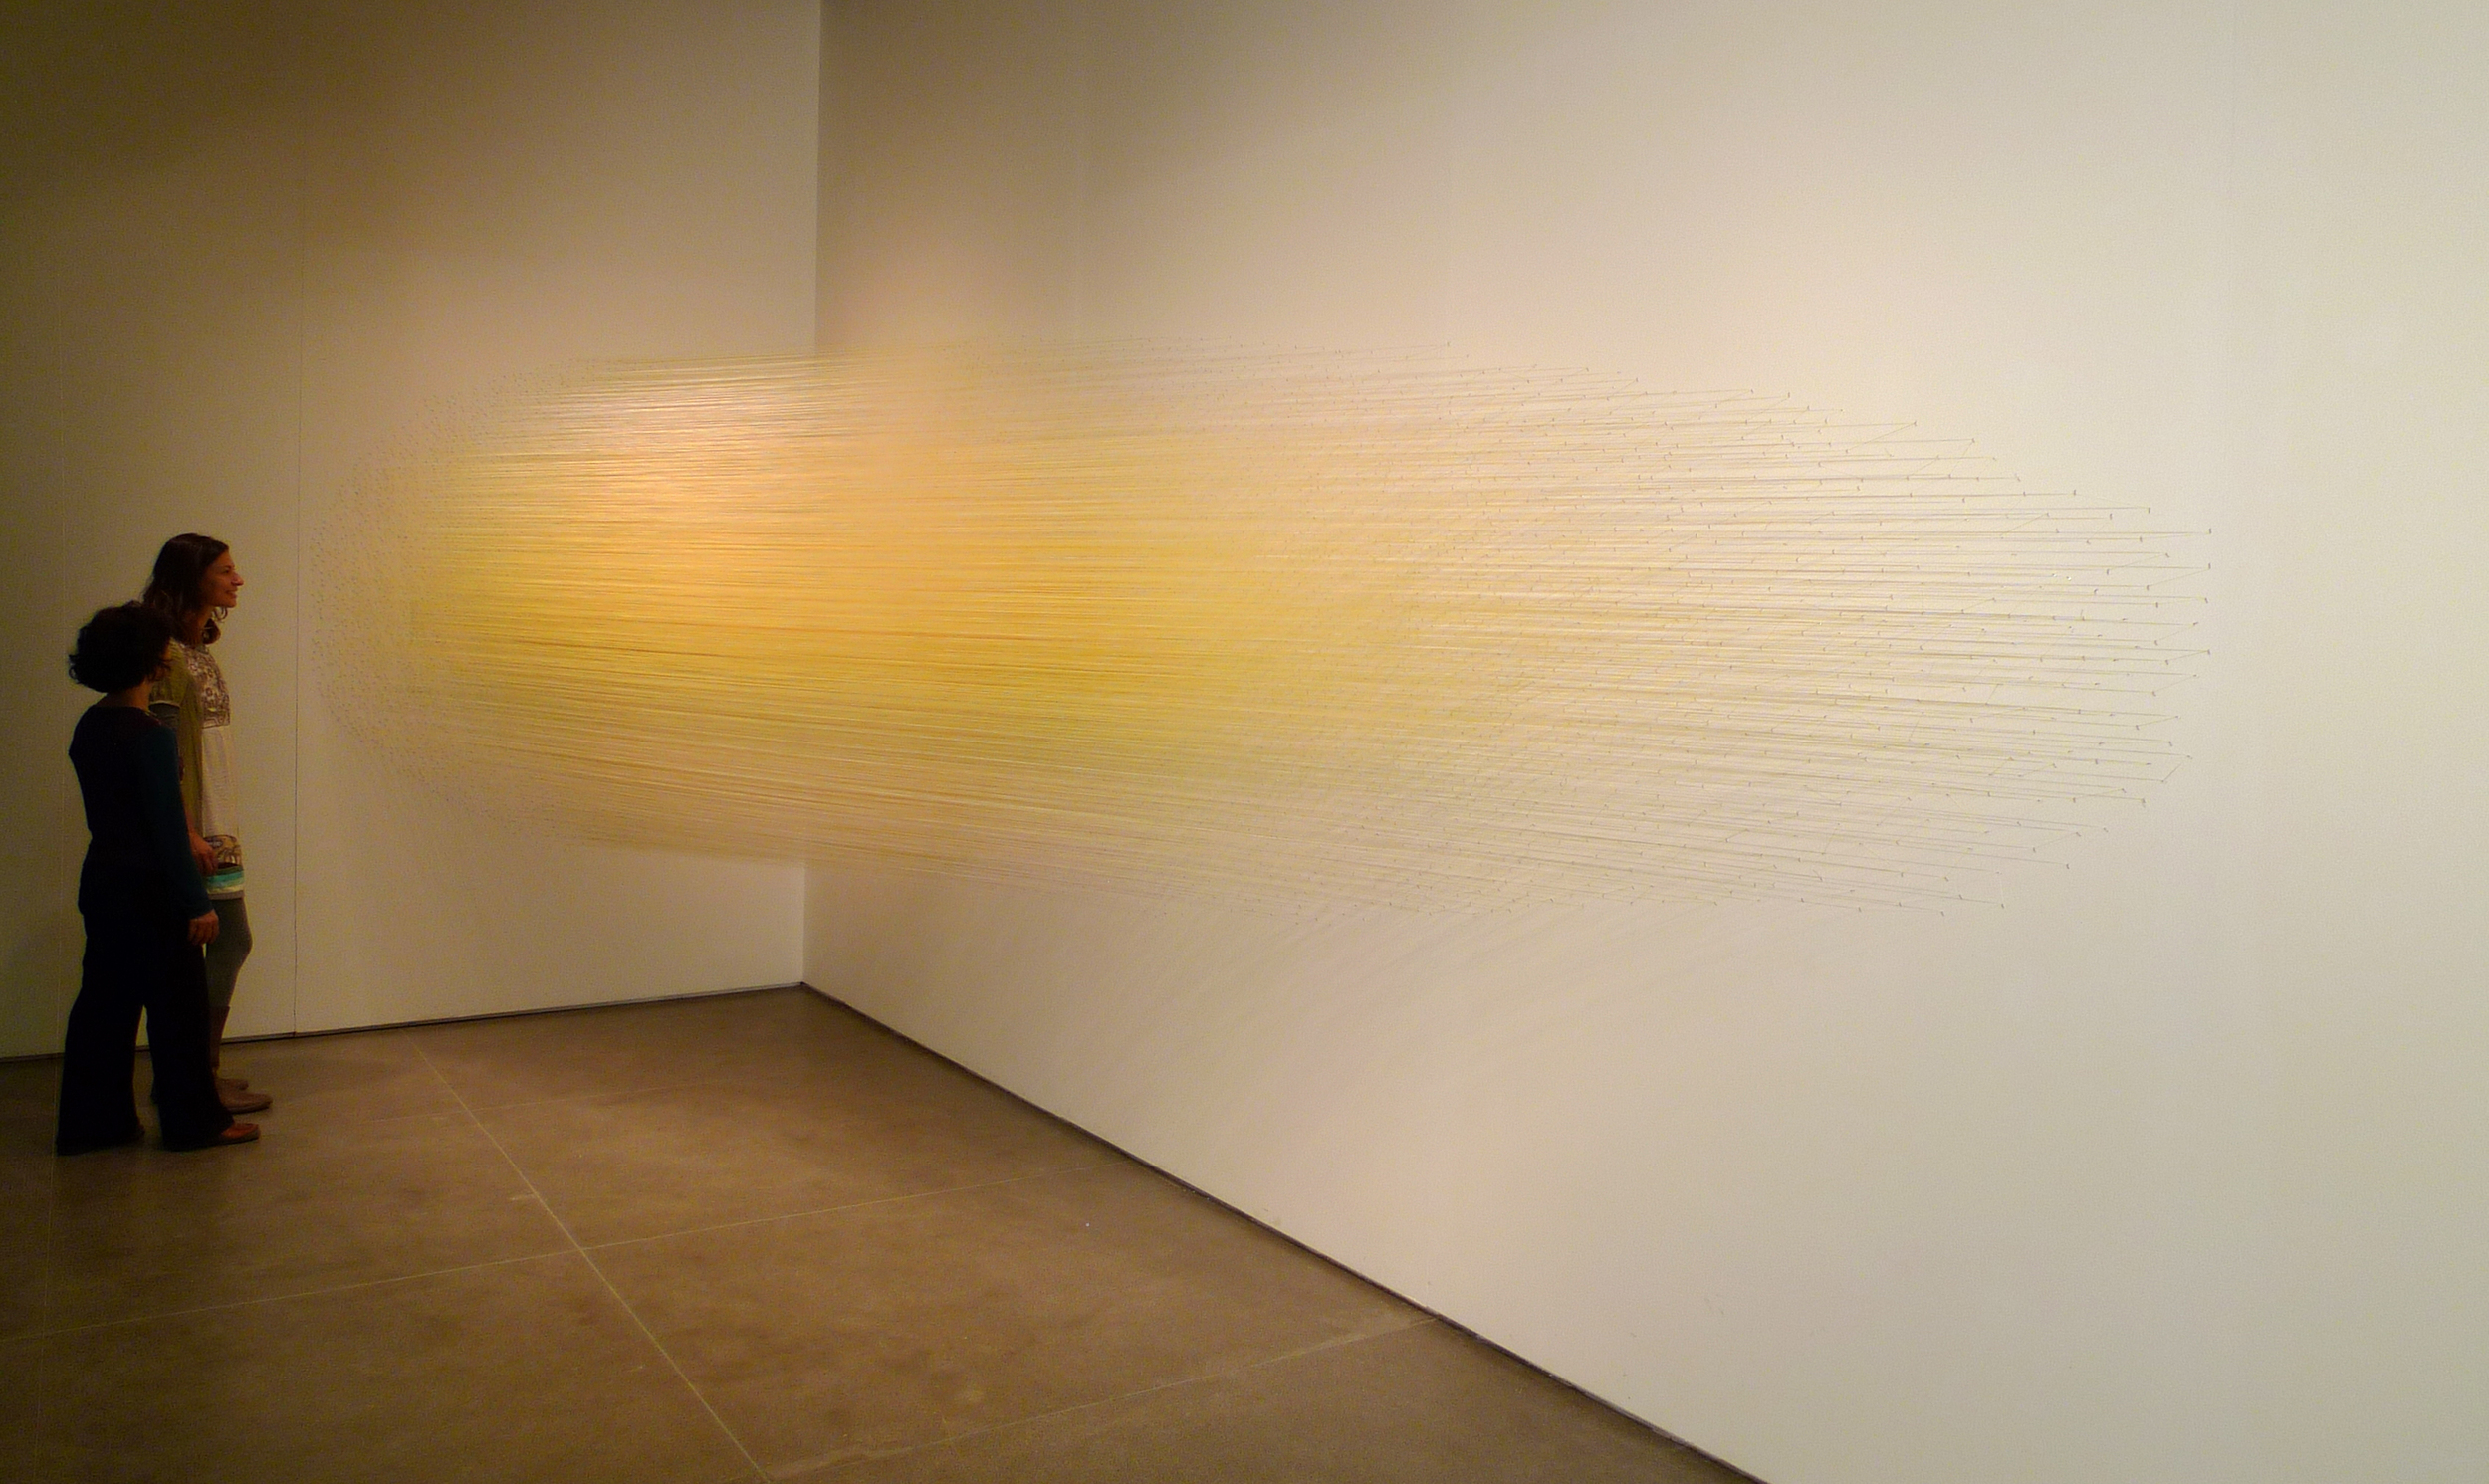    canto yellow   2011 cotton thread, staples 18 by 6 by 6 feet photography by Derek Porter 